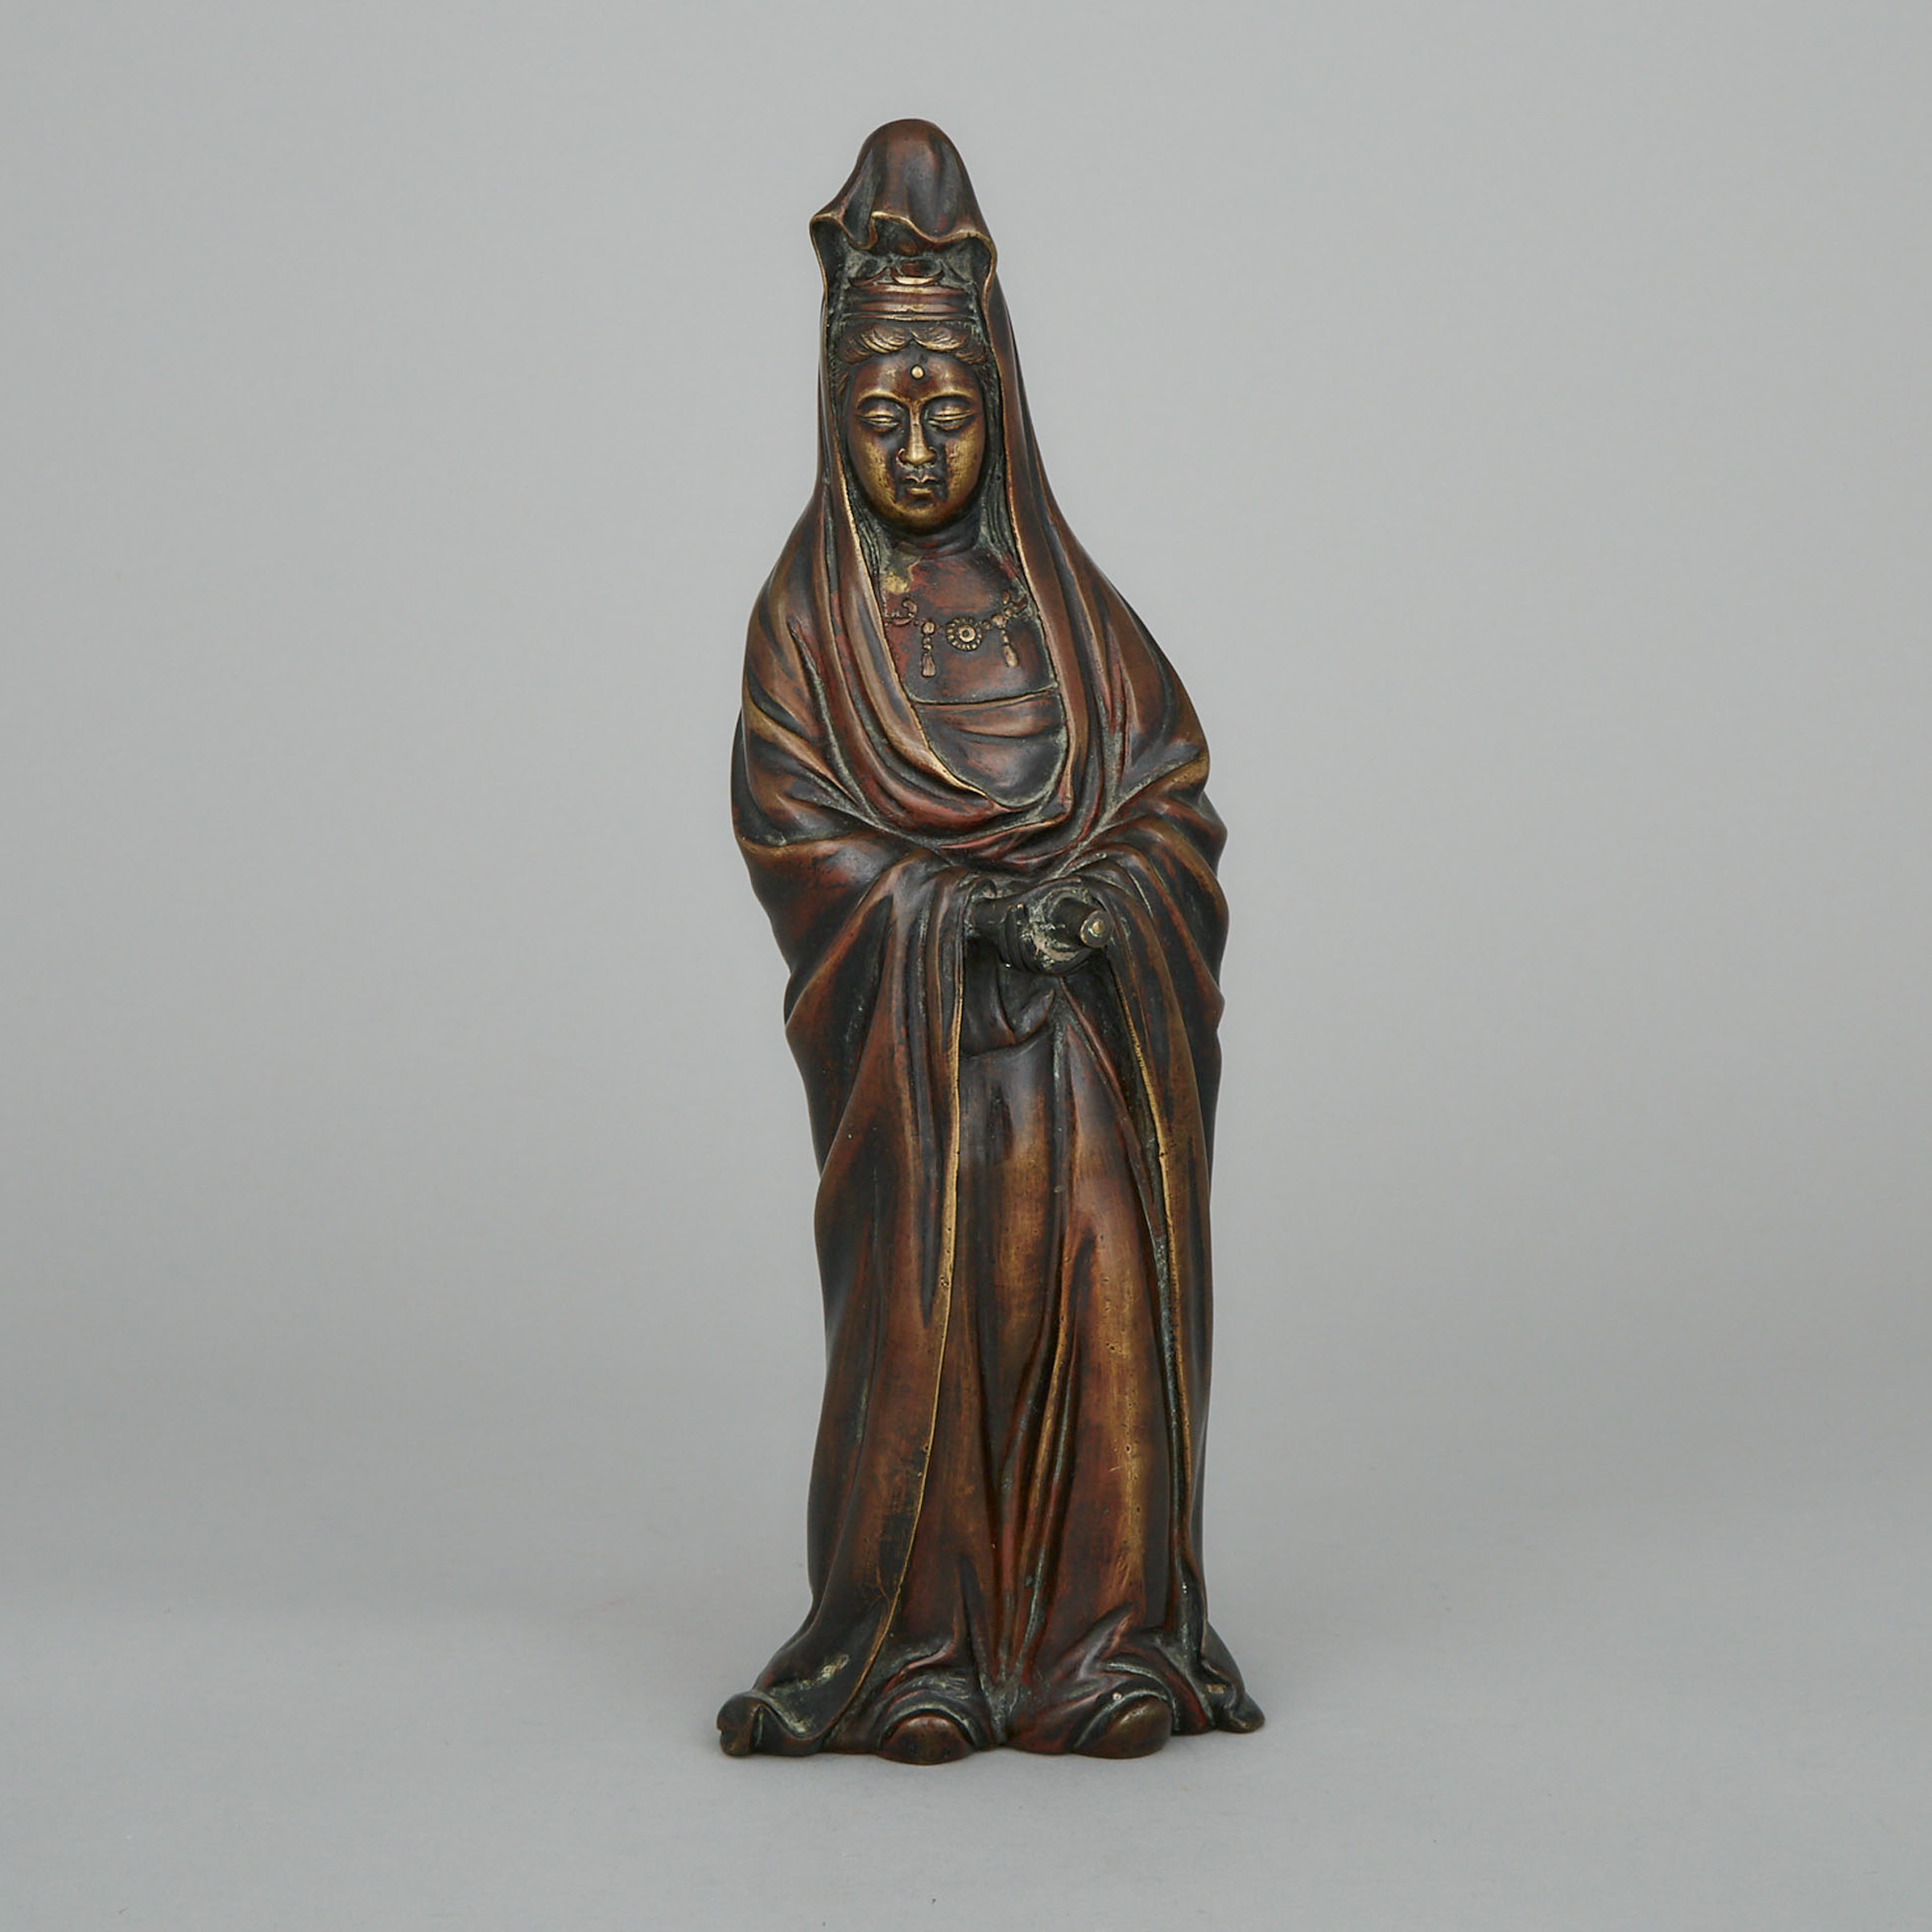 Chinese Patinated Bronze Figure of Guanyin, early-mid 20th century